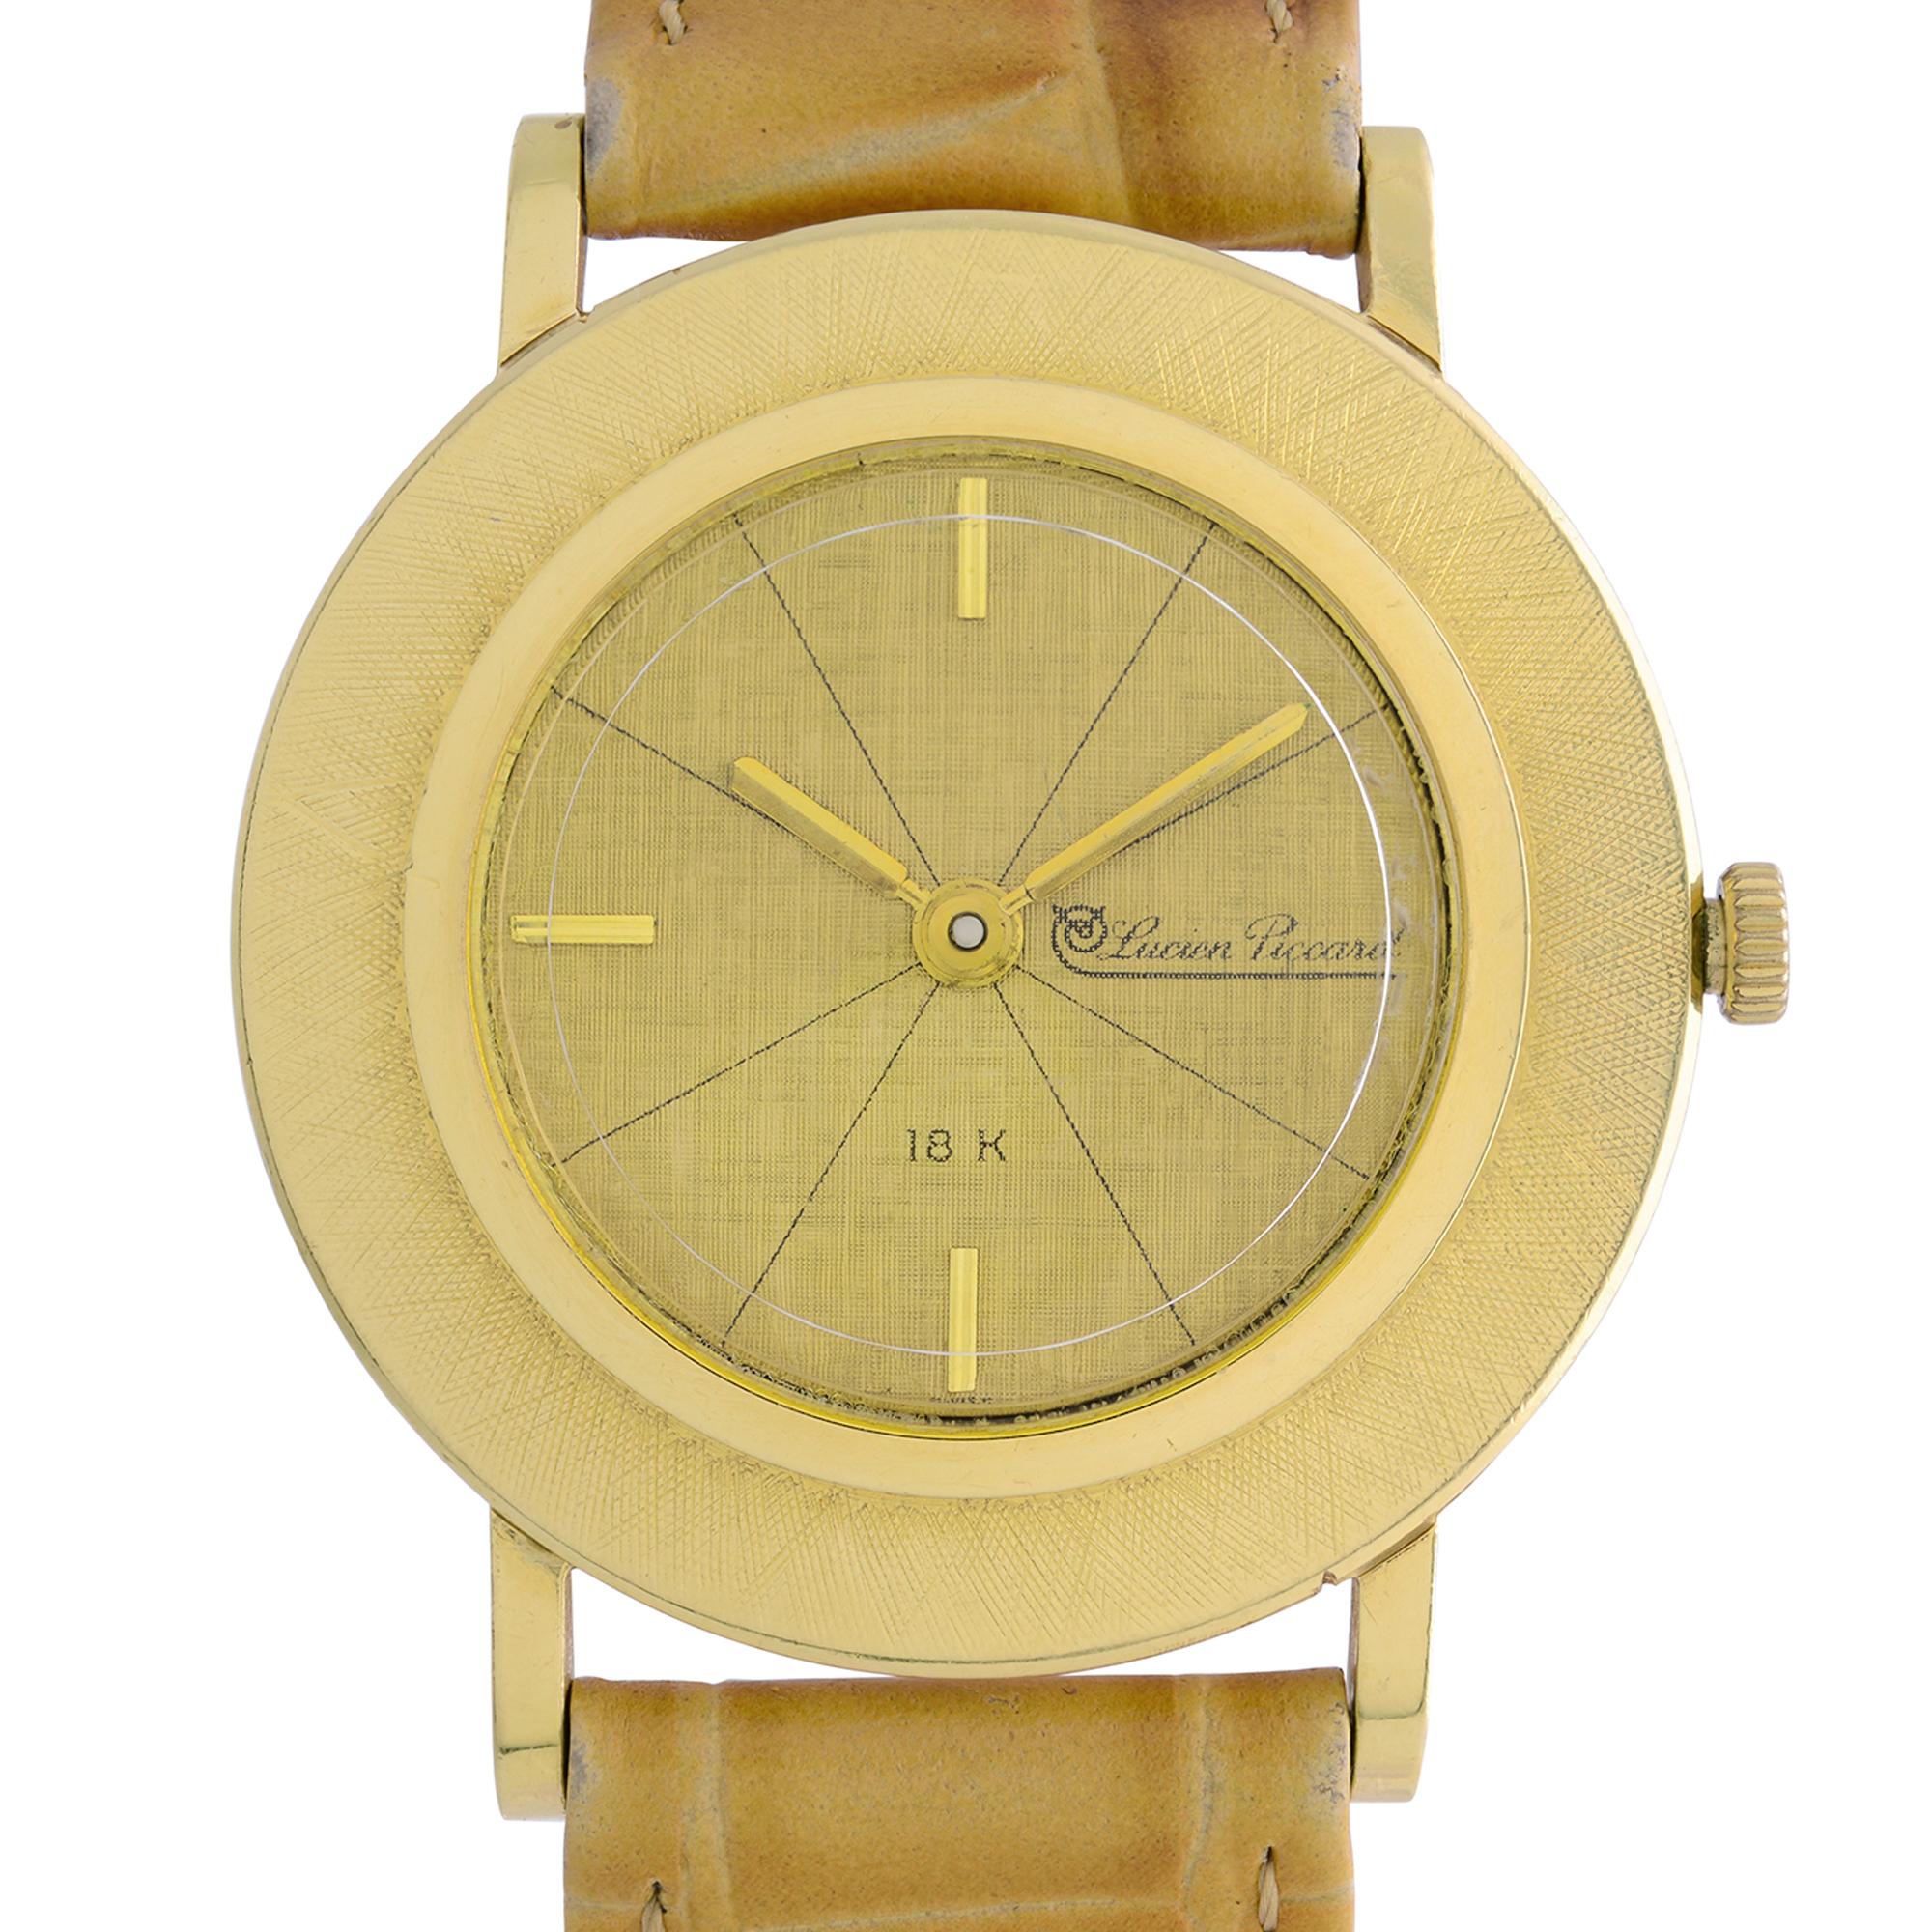 Pre-owned Vintage Lucien Piccard 18k Gold Manual Gold Dial Men's Watch. aftermarket band and buckle. Band Shows Significant Wear Signs. The Watch Case and Bezel Show Moderate Wear Signs as Seen in the Pictures. The watch will be polished only on